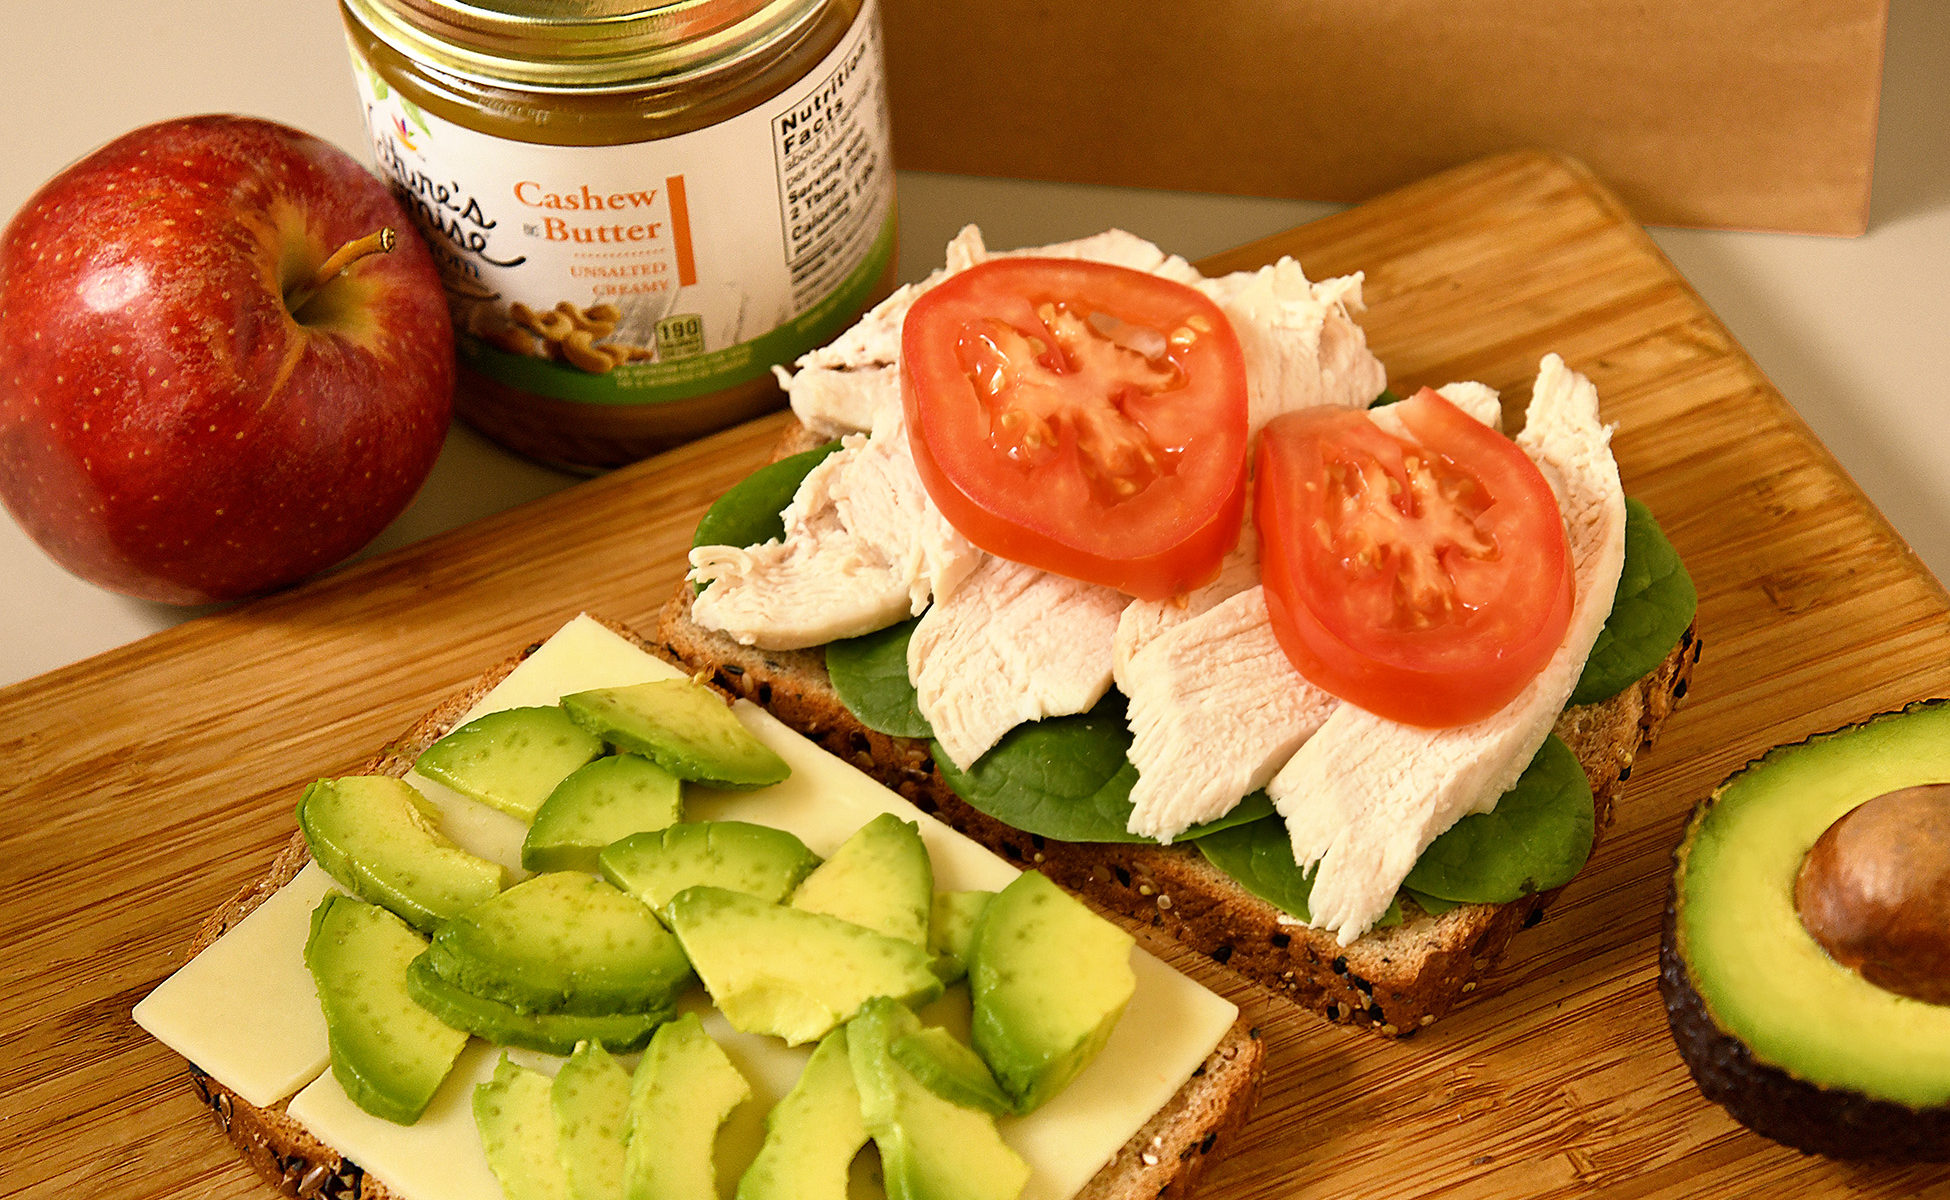 delicious sandwich, chicken breast, swiss cheese, sliced tomato, avocado and baby spinach on multi-grain wheat bread, also showing apple and cashew butter